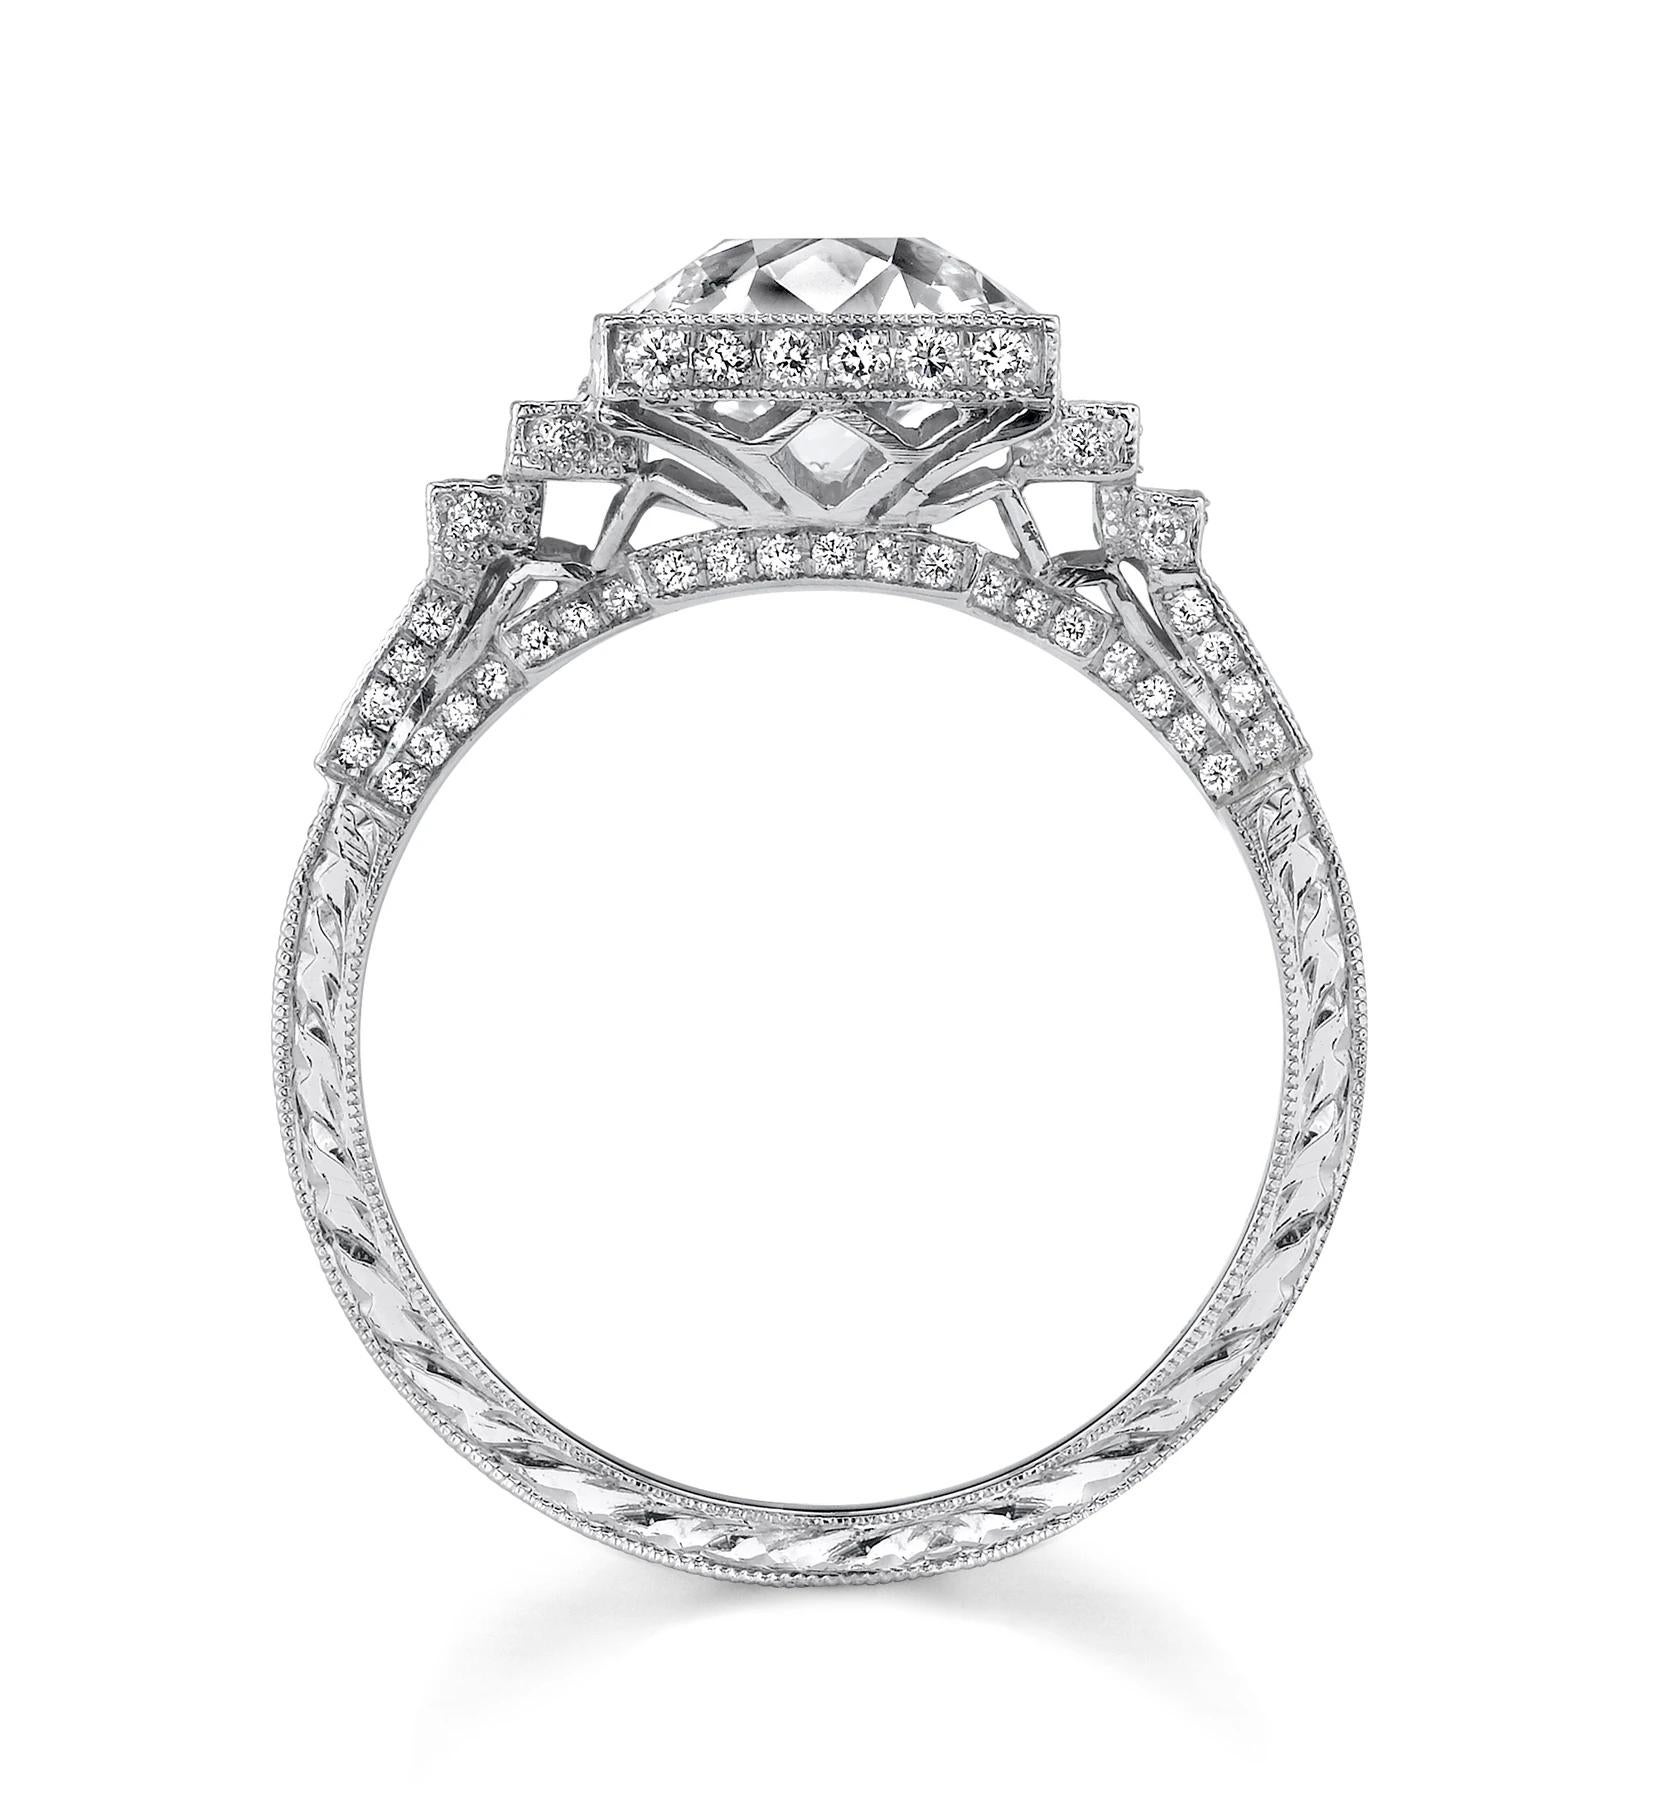 Architectural in design, this Neil Lane ring features an Old European-cut diamond weighing 1.80 cts., D Color and VS2 Clarity, cascading into finely millegrained platinum sections set throughout with one hundred full-cut diamonds weighing 0.49 ct.,